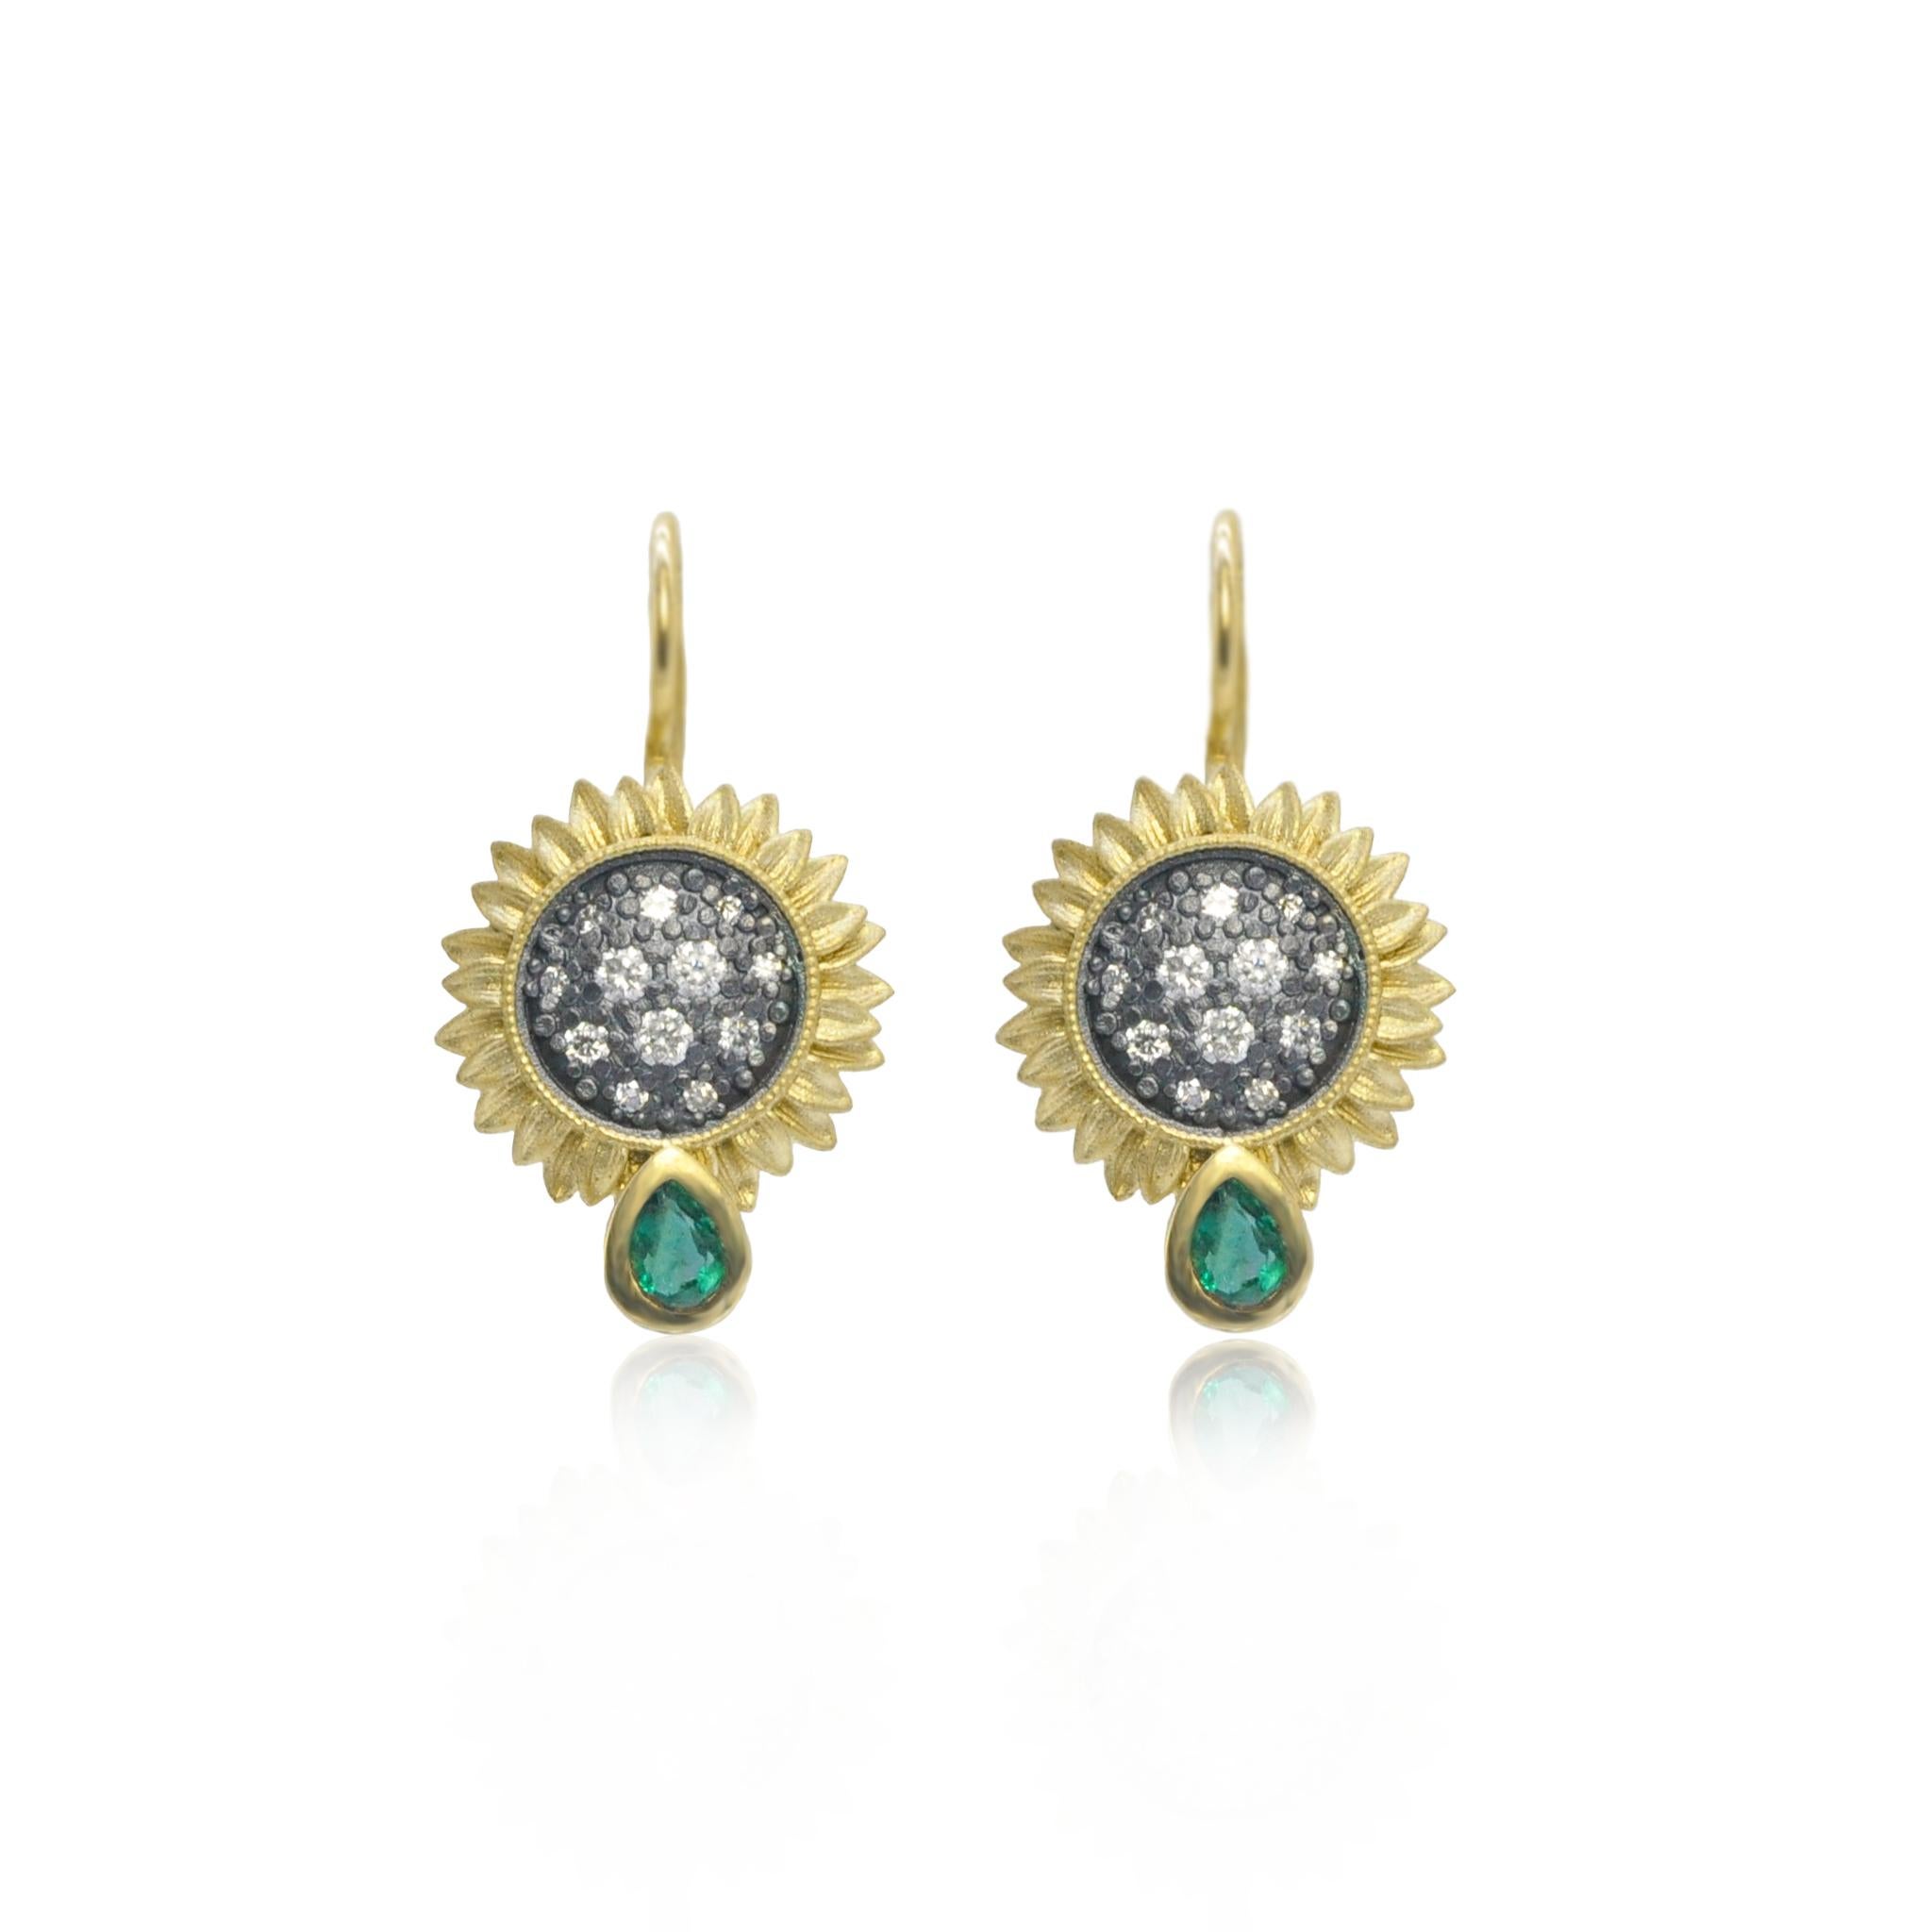 Artisan Sunflower Earrings with Pave Set Diamond in Oxidized Silver with Emeralds, Small For Sale